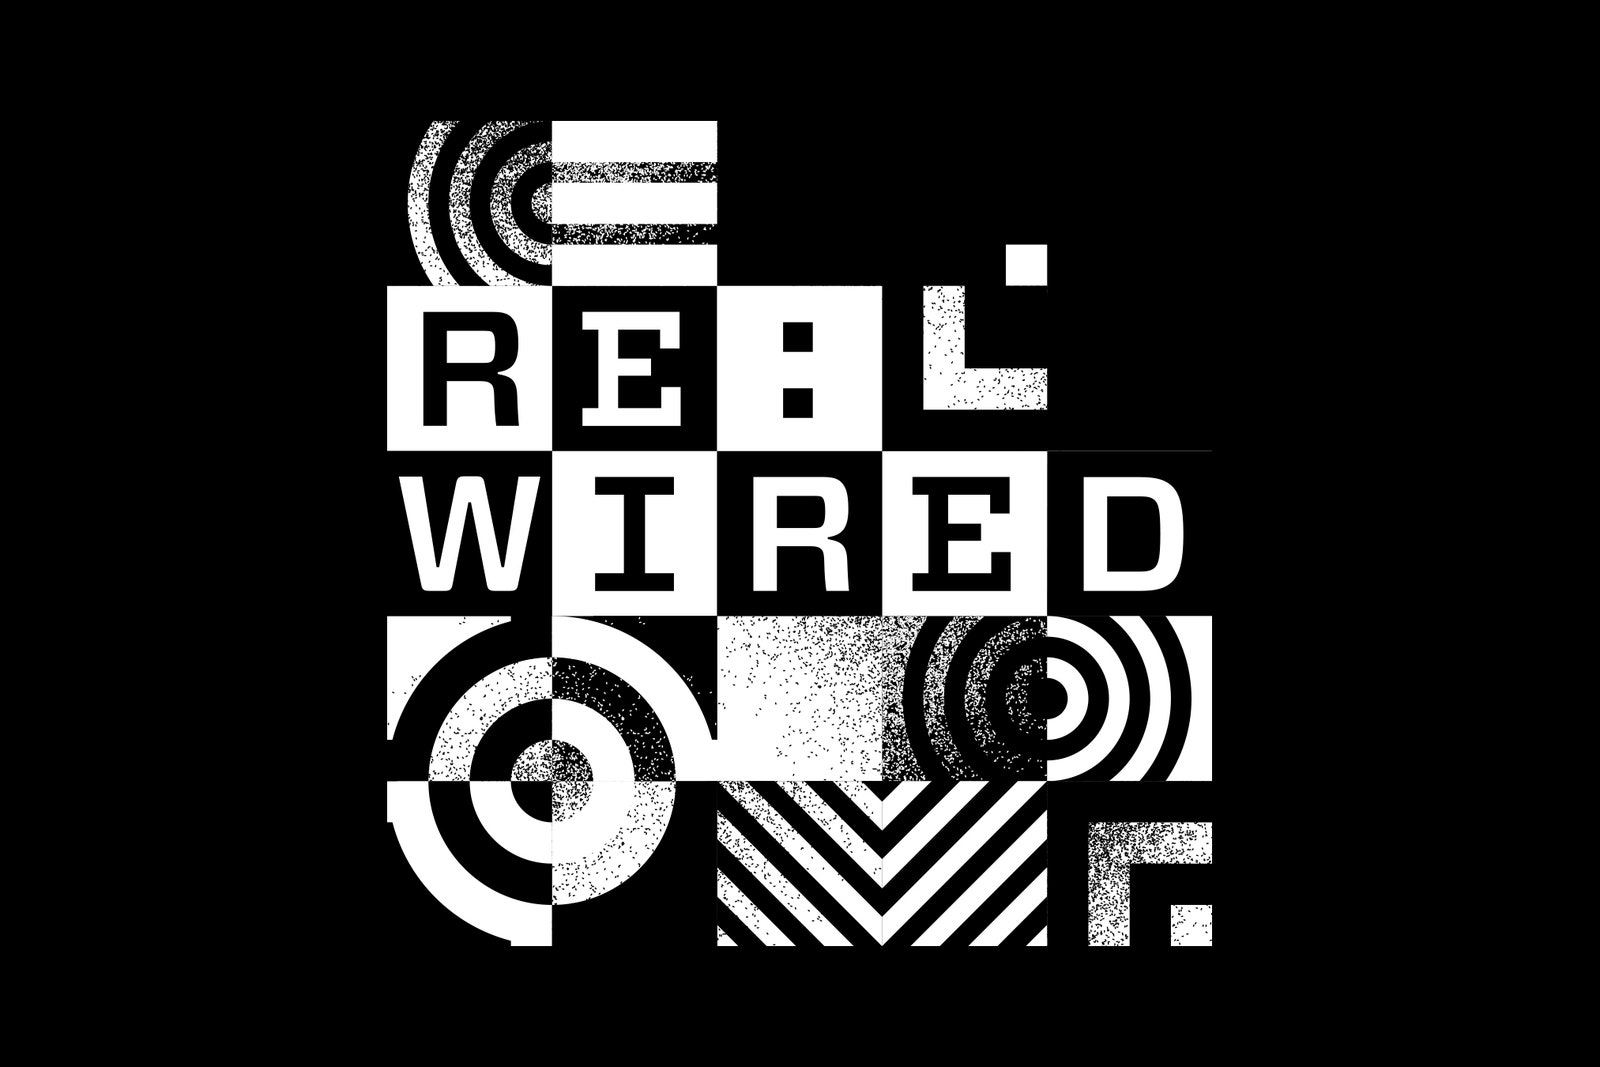 Watch Highlights From Our RE:WIRED 2021 Event